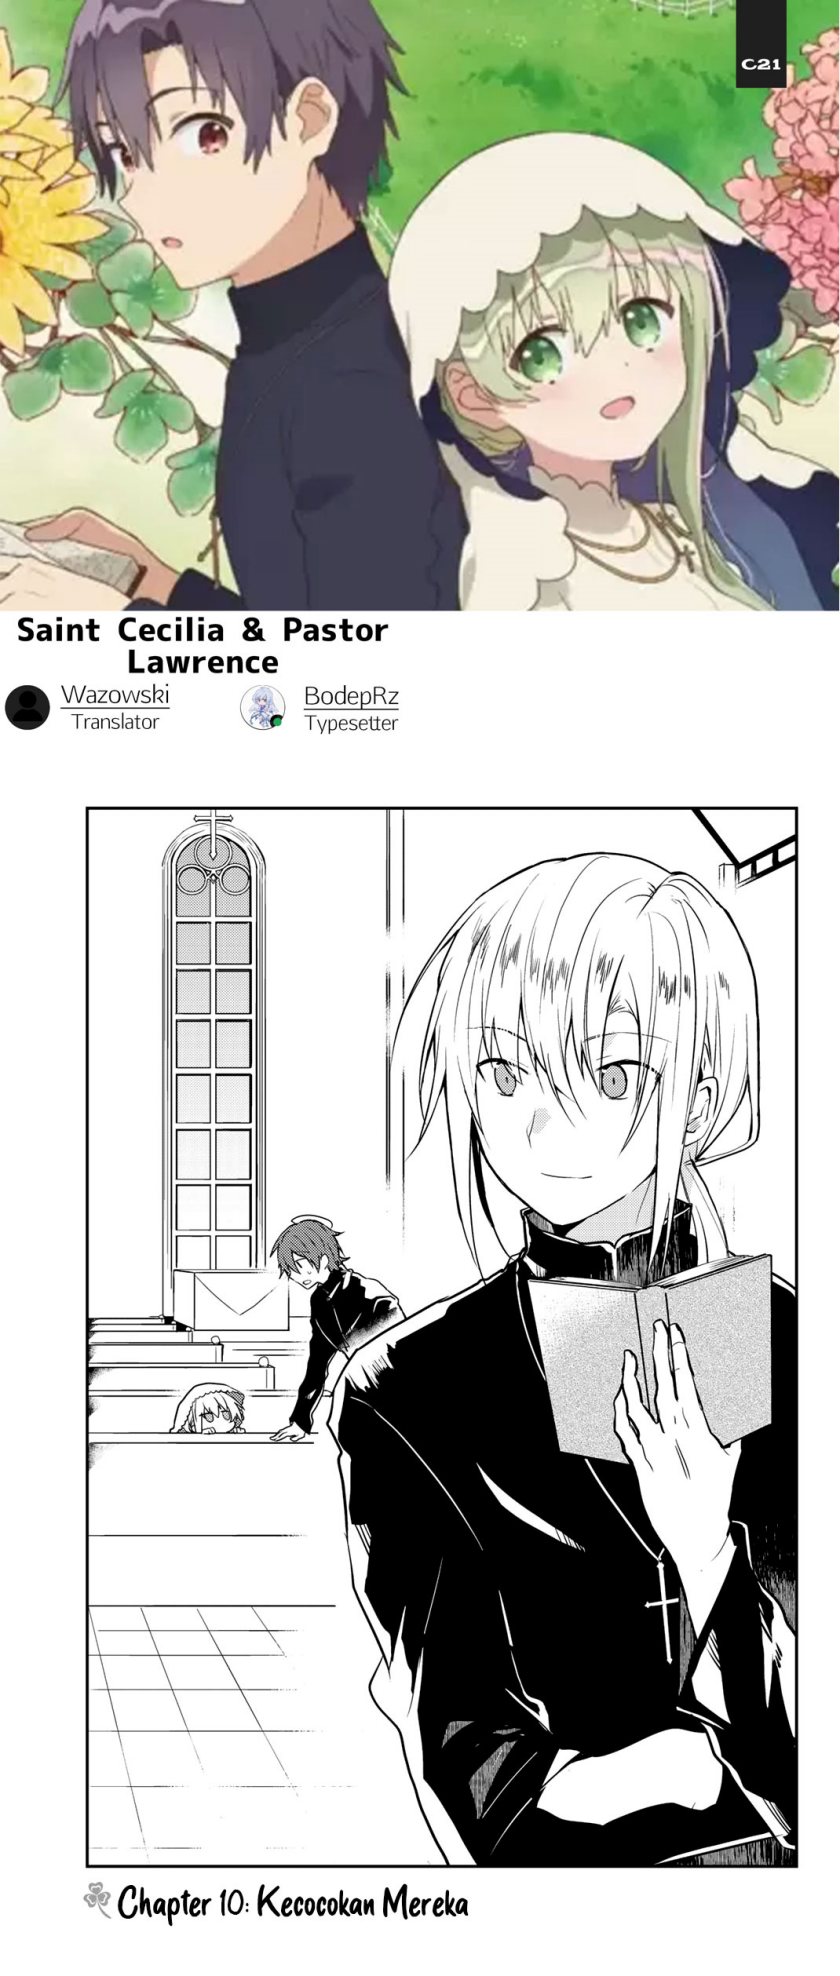 Saint Cecilia & Pastor Lawrence Chapter 10